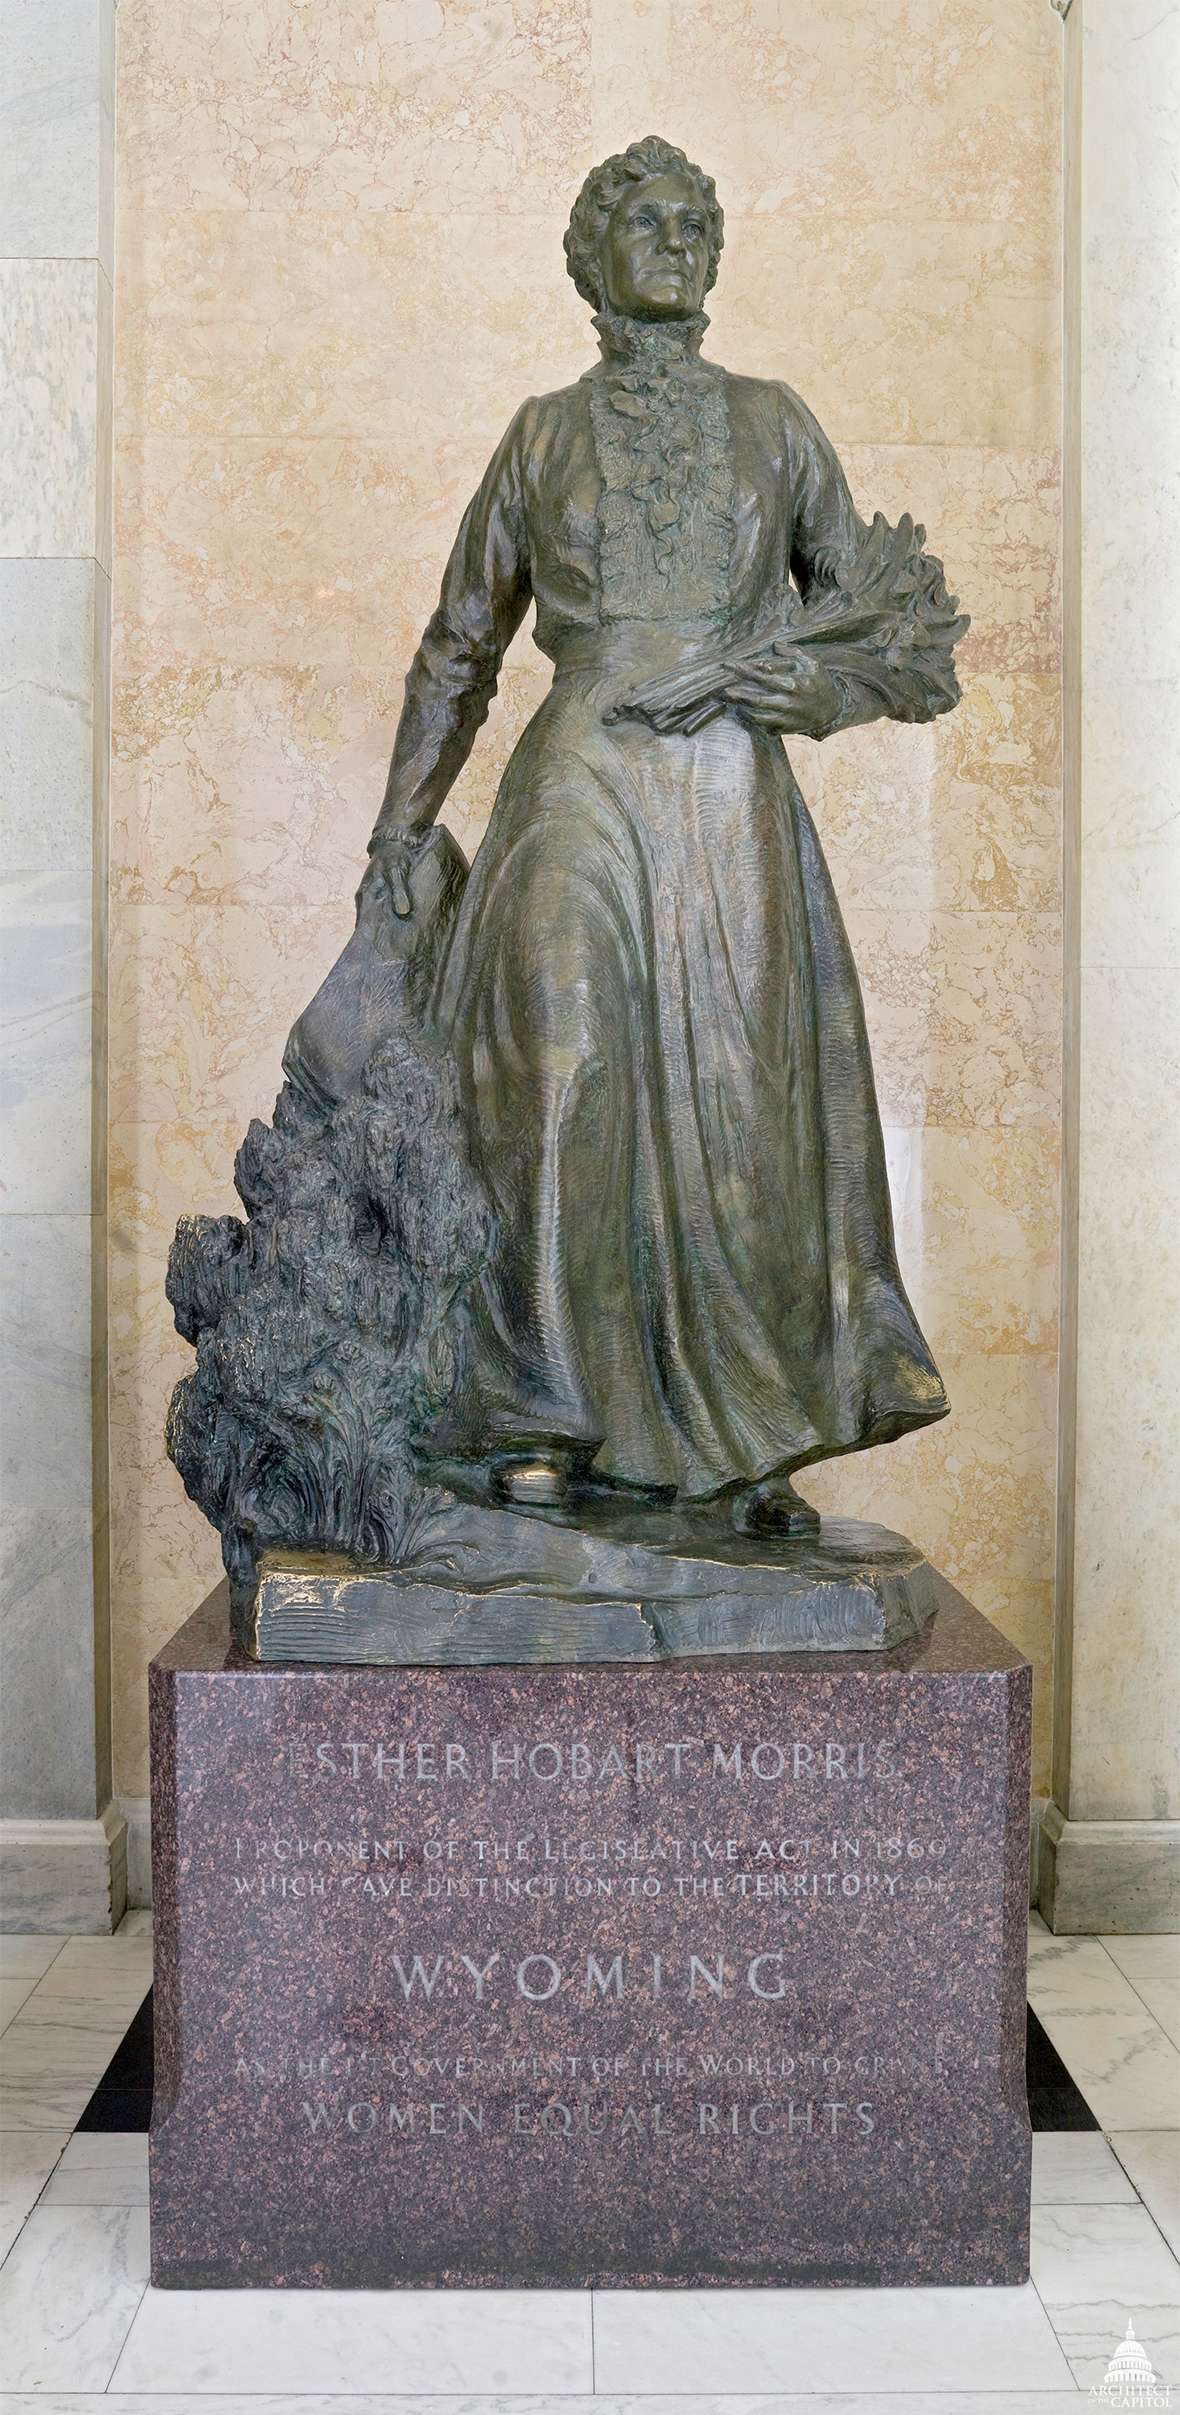 The heroic Avard Fairbanks statue of Esther Morris at the U.S. Capitol was installed in 1960, and remains there. A duplicate stood for decades in front of the Wyoming Capitol. As part of the 2019 remodel of the building the sculpture was moved underground to the Capitol Extension between the Capitol and the Herschler Building. Architect of the Capitol. 